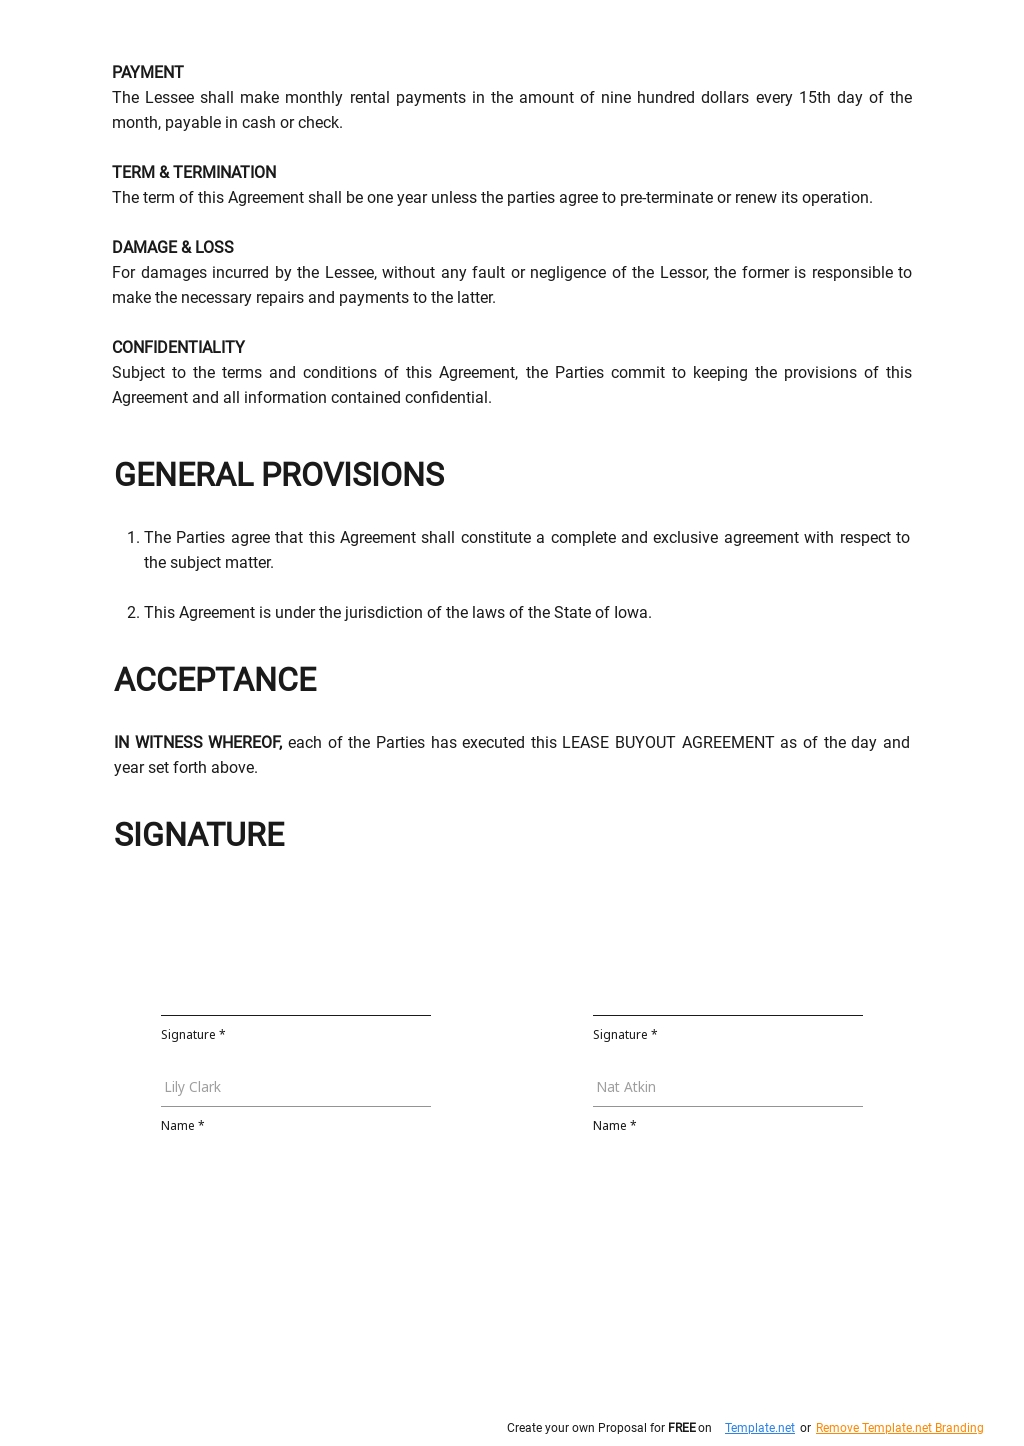 Lease Buyout Agreement Template 2.jpe